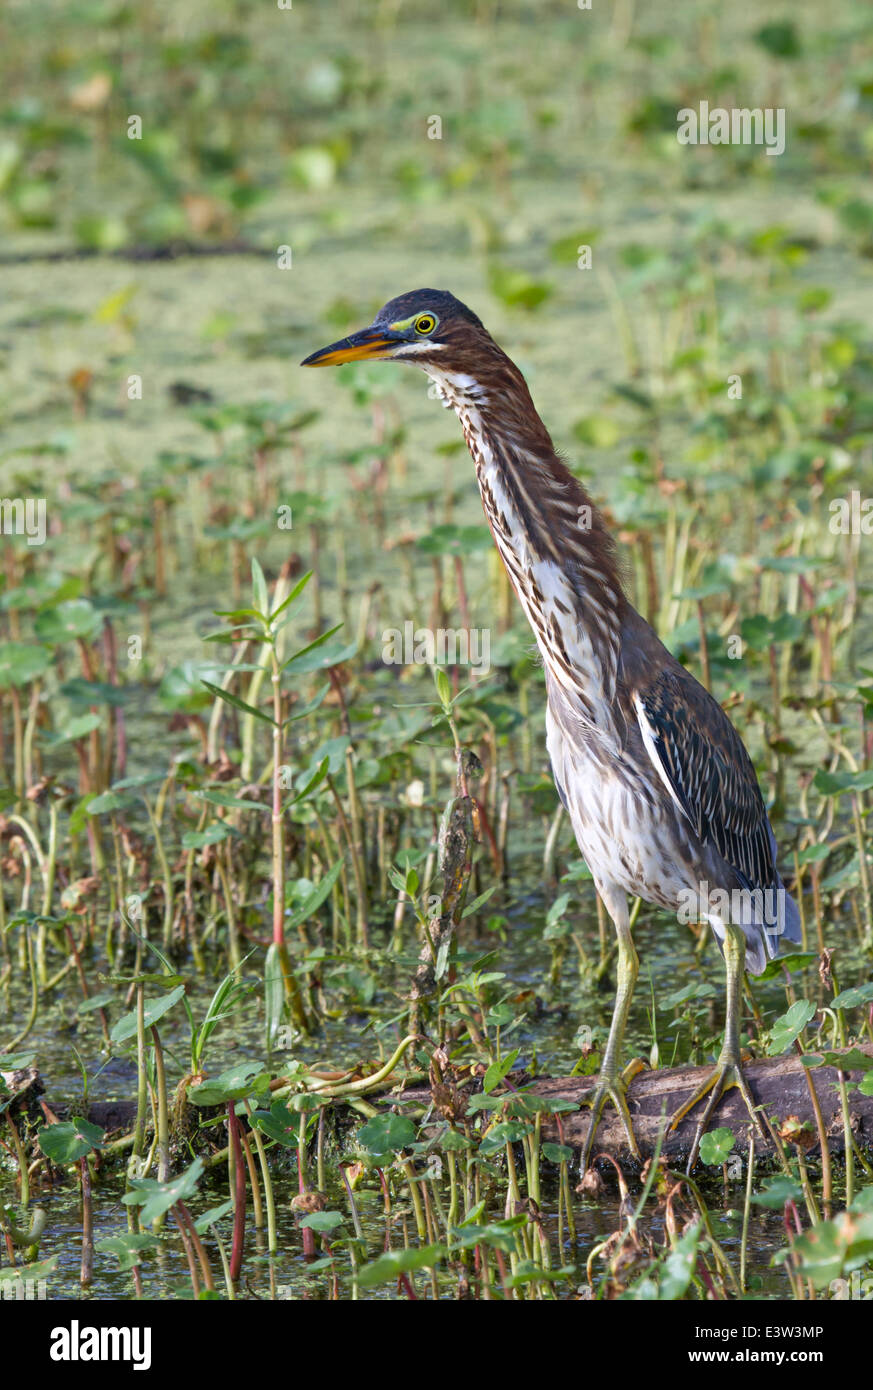 Green heron (Butorides virescens) demonstrating defensive 'Forward' display against another heron entering the territory. Stock Photo